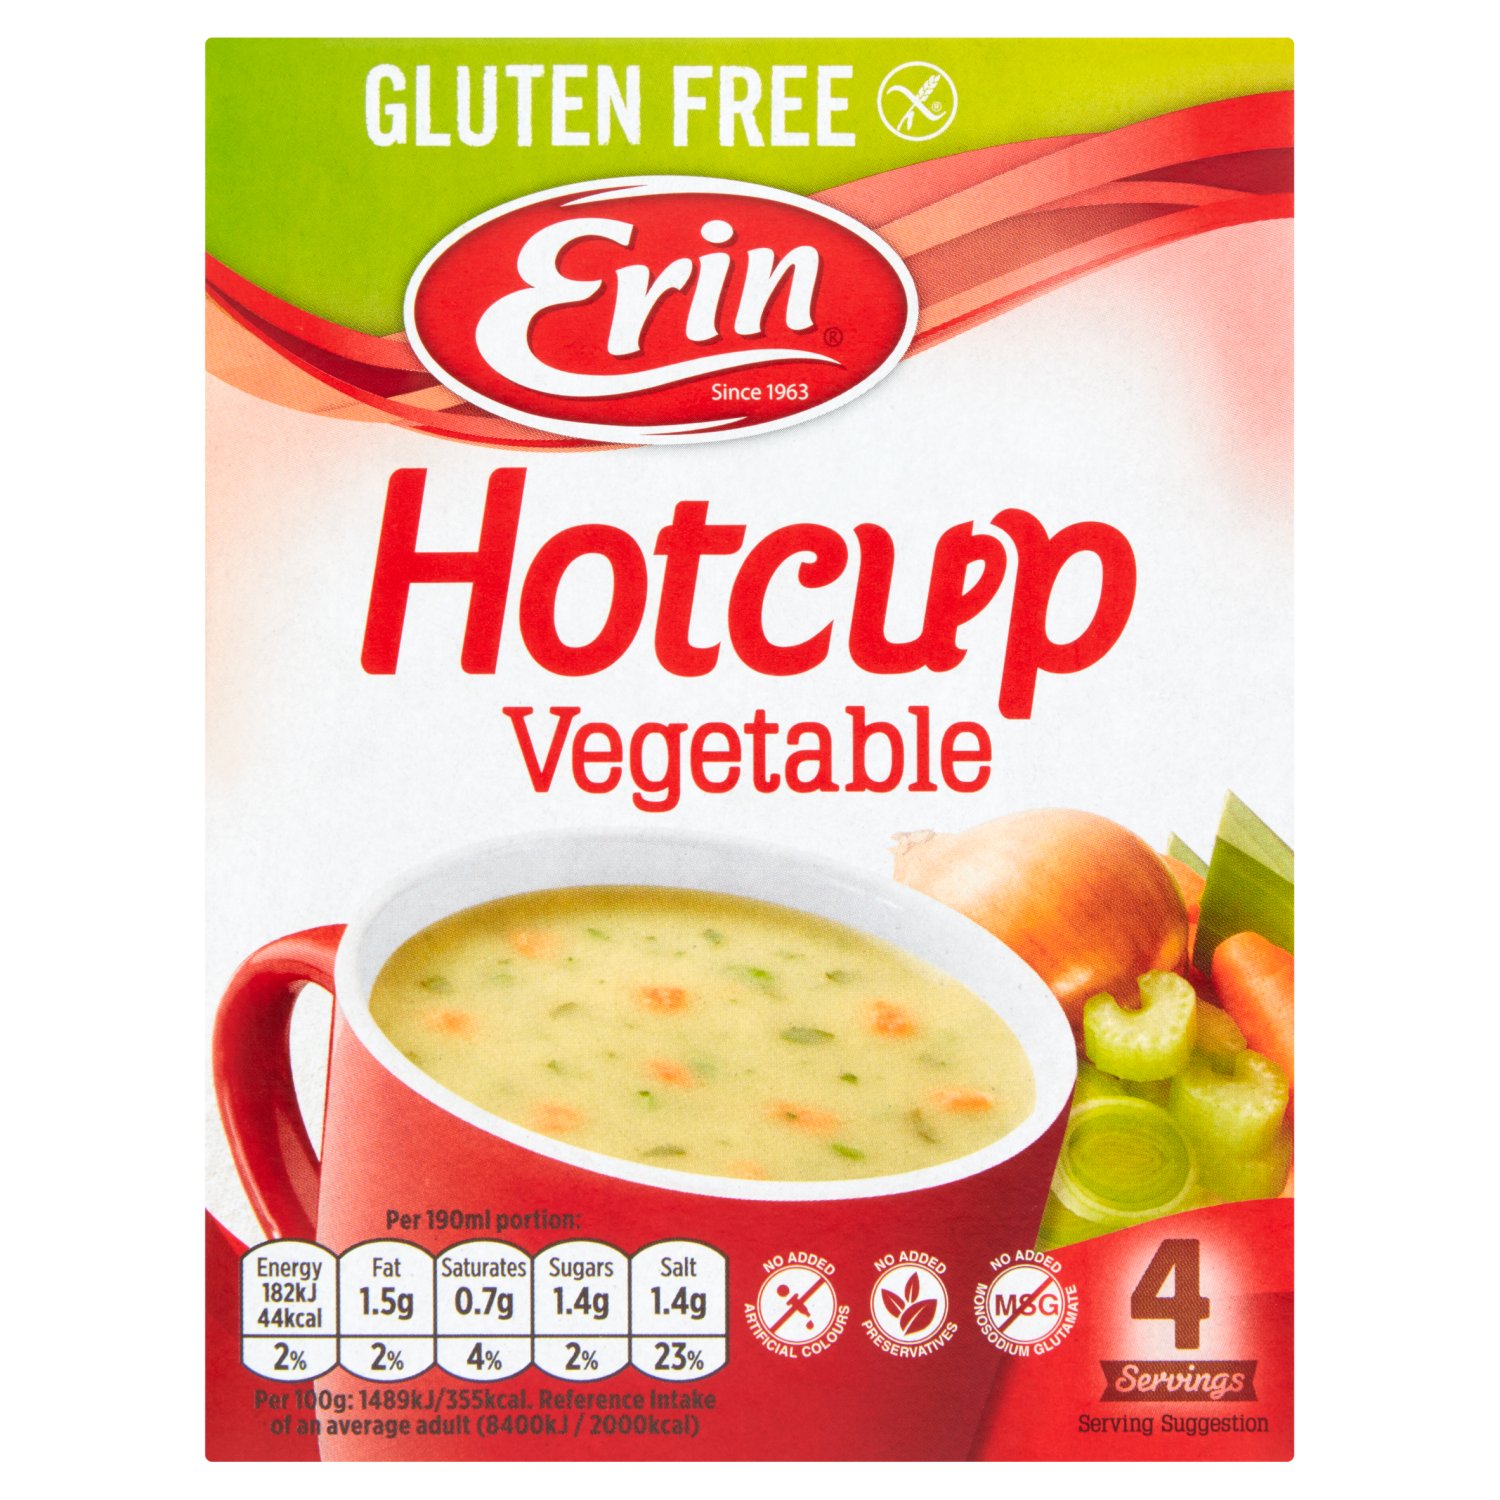 Erin Hotcup Vegetable Gluten Free 4 Pack Soup (49 g)